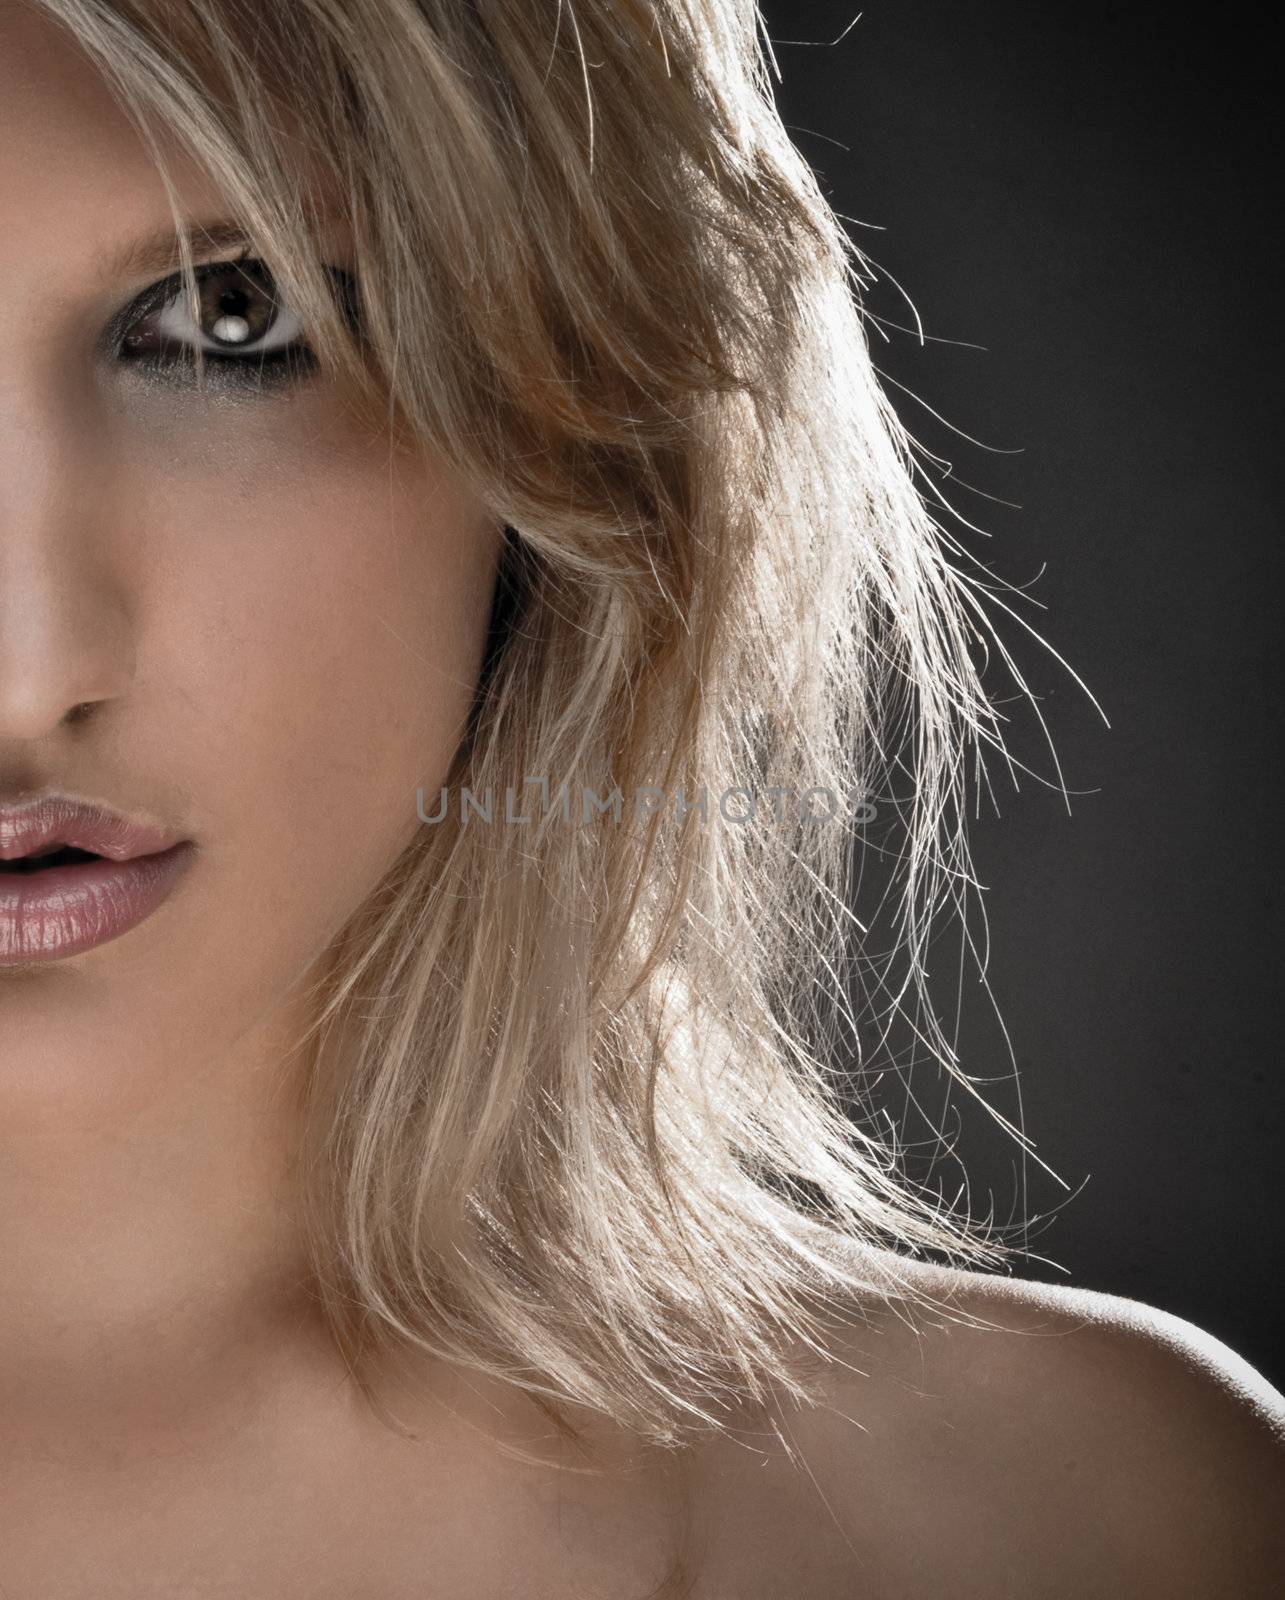 Half Face Portrait Of A Beautiful Blond Woman by nfx702